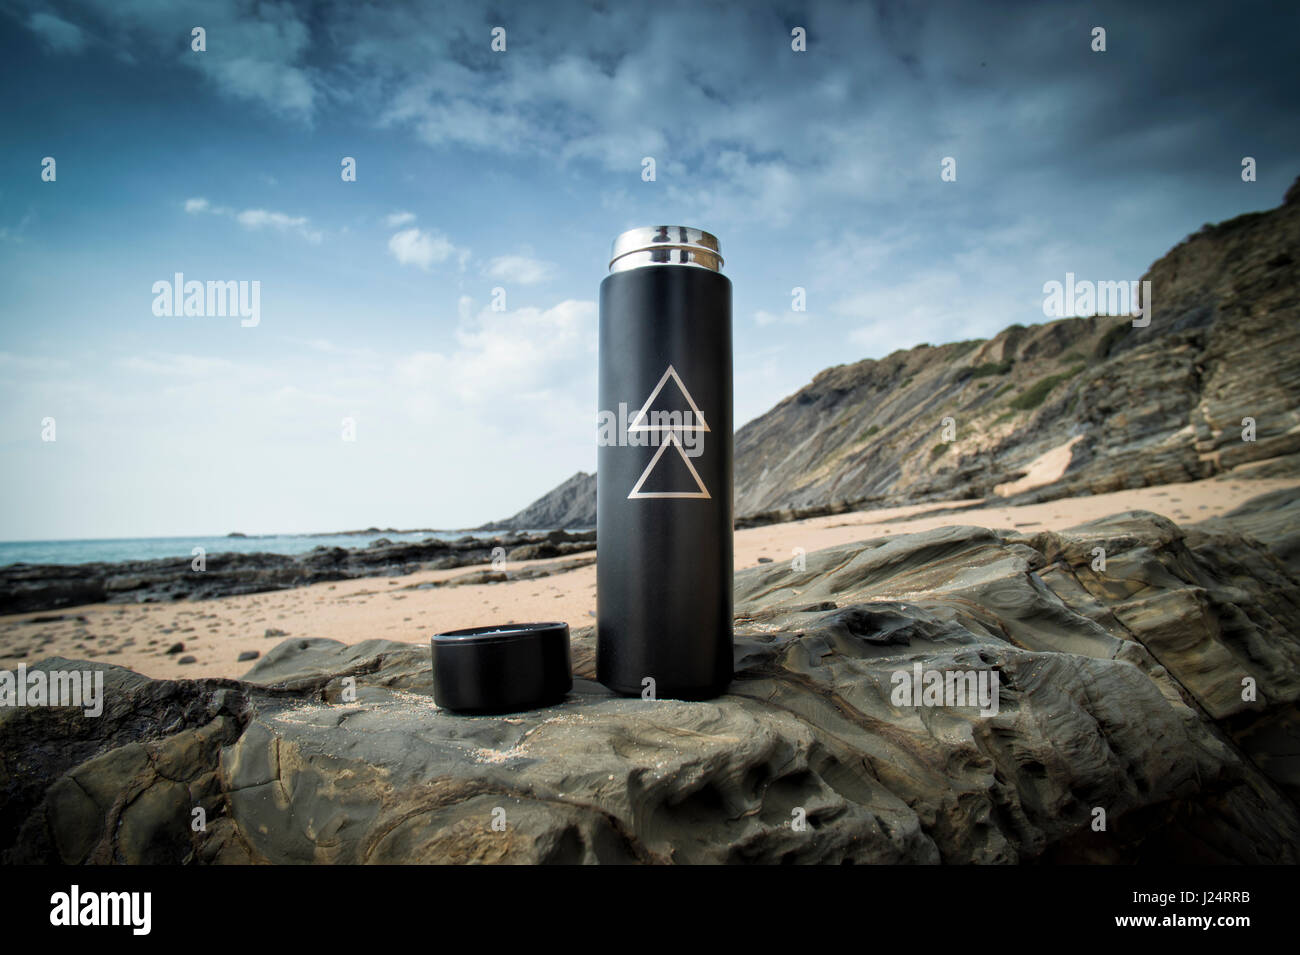 Thermos flask sitting on rocks by the sea Stock Photo